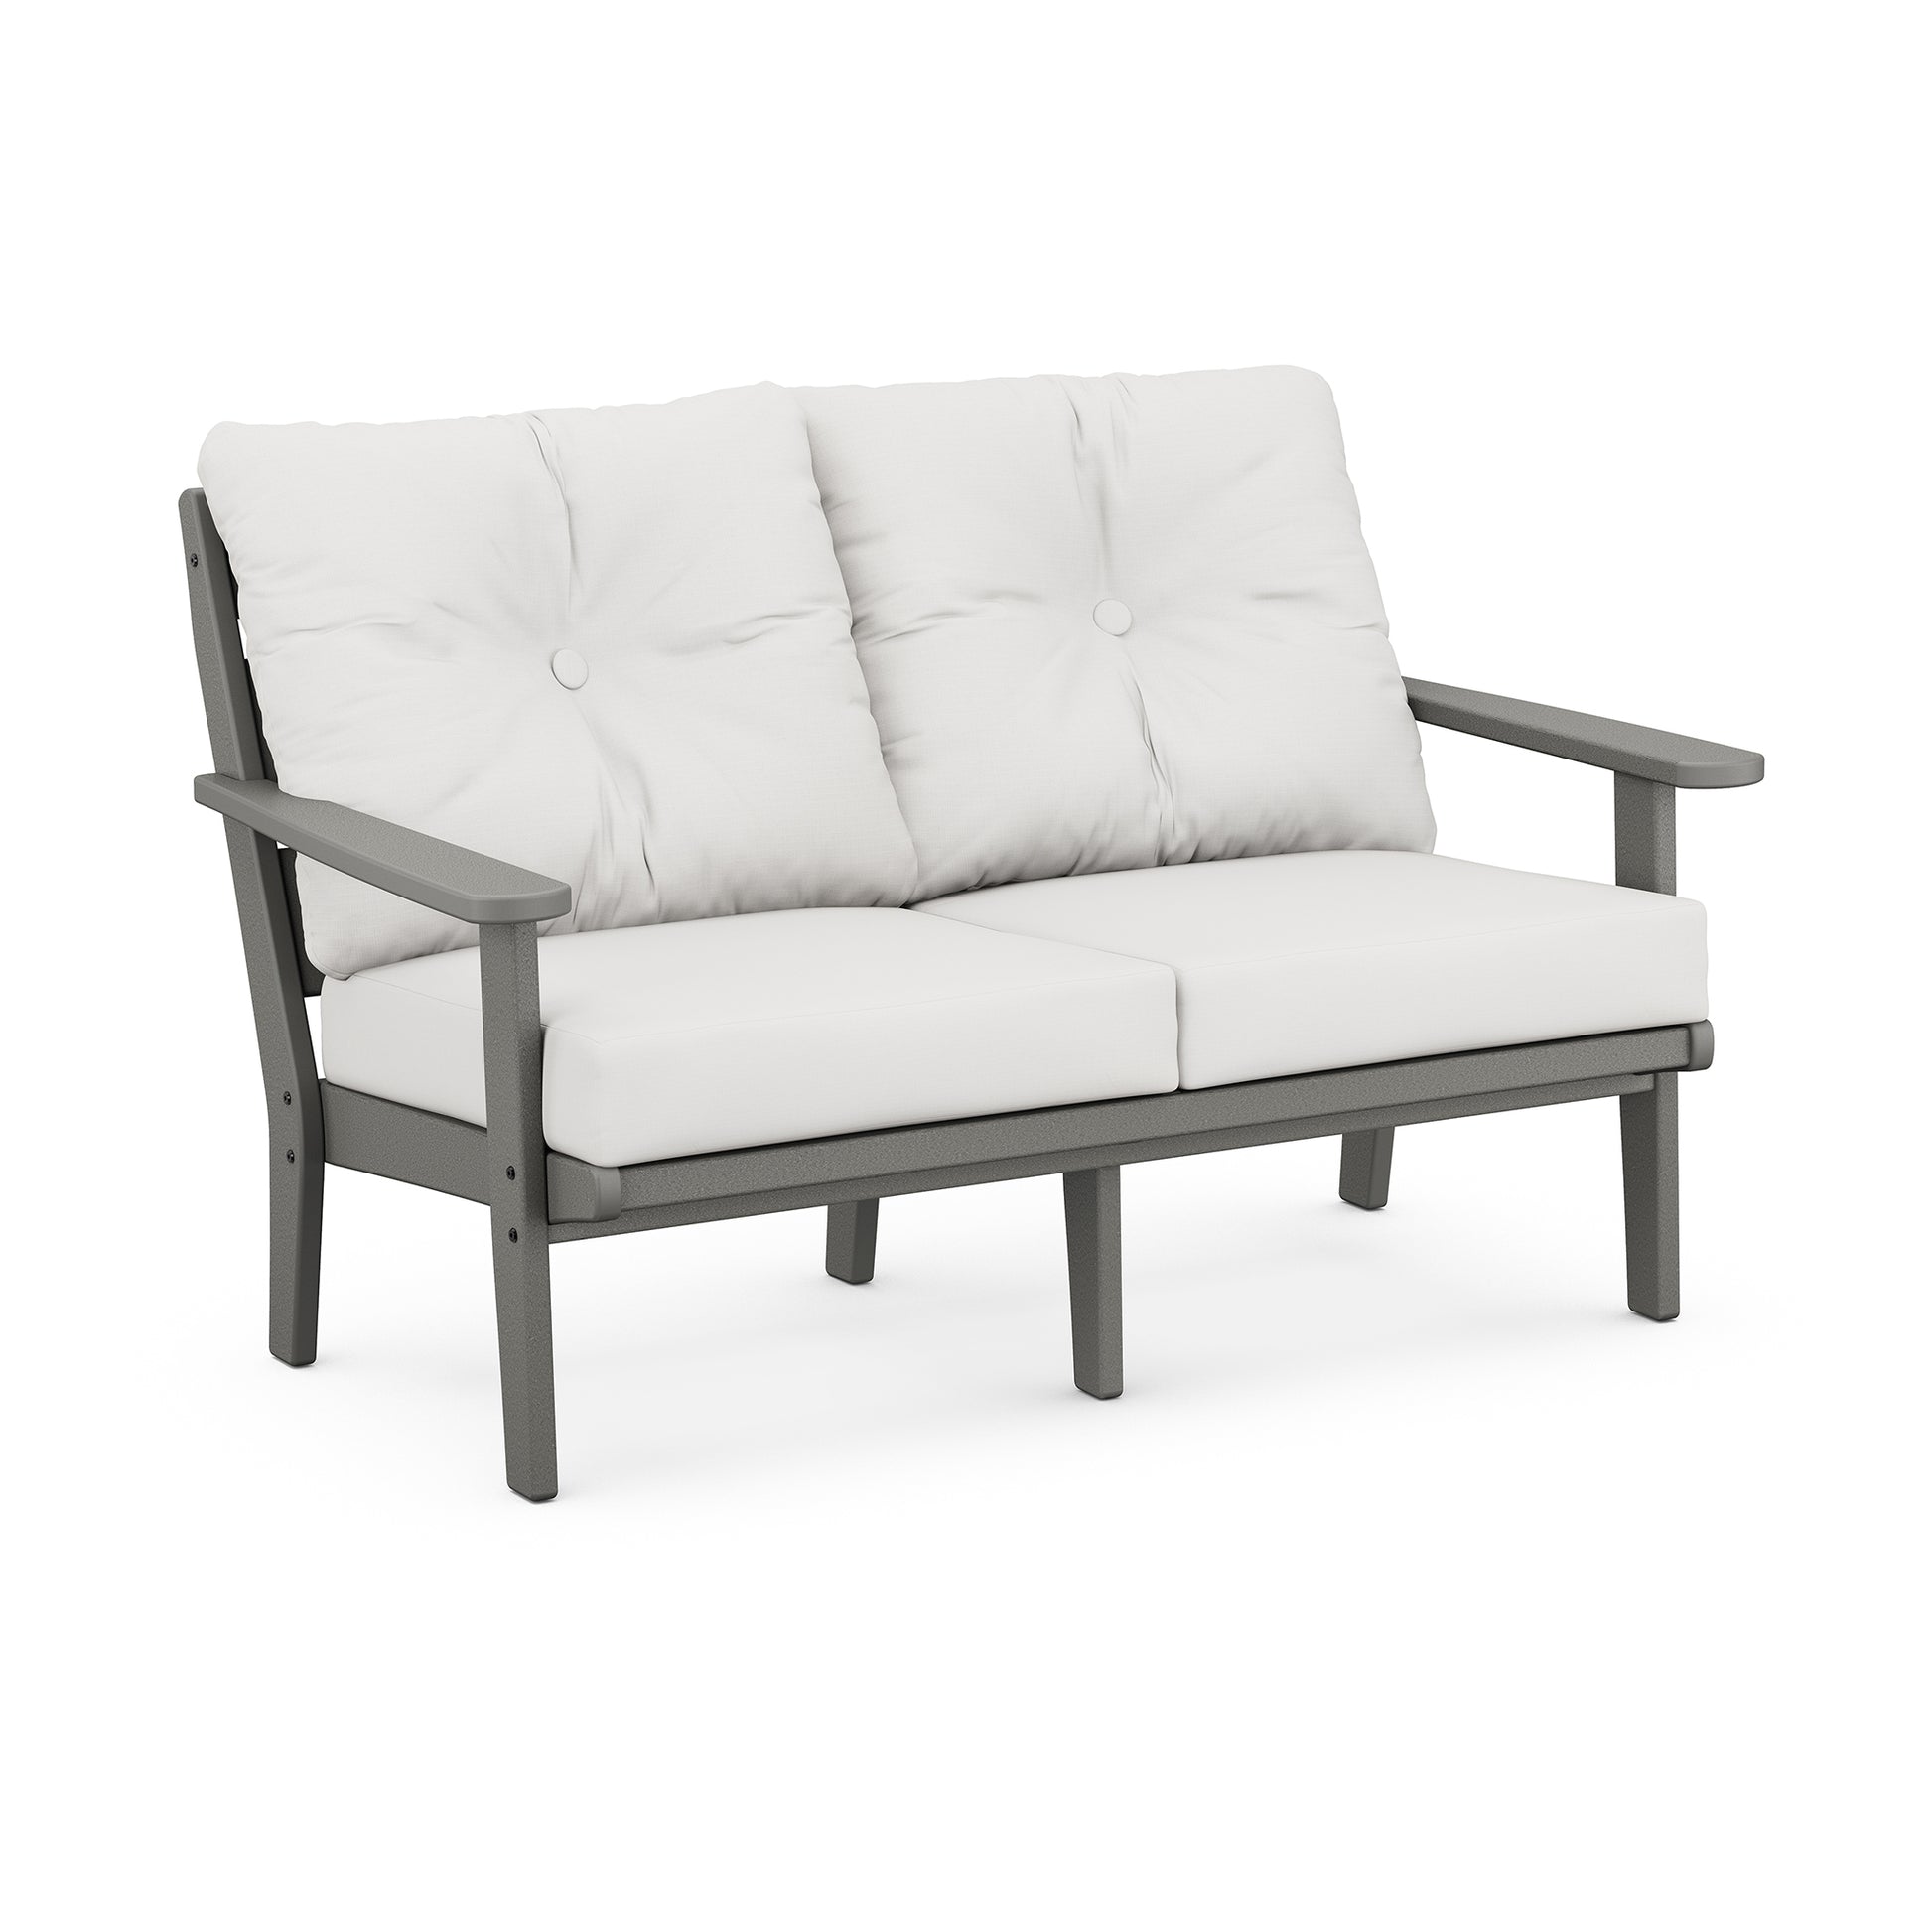 A modern gray POLYWOOD Lakeside Deep Seating Loveseat with white cushions on the seat and backrest, isolated on a white background.